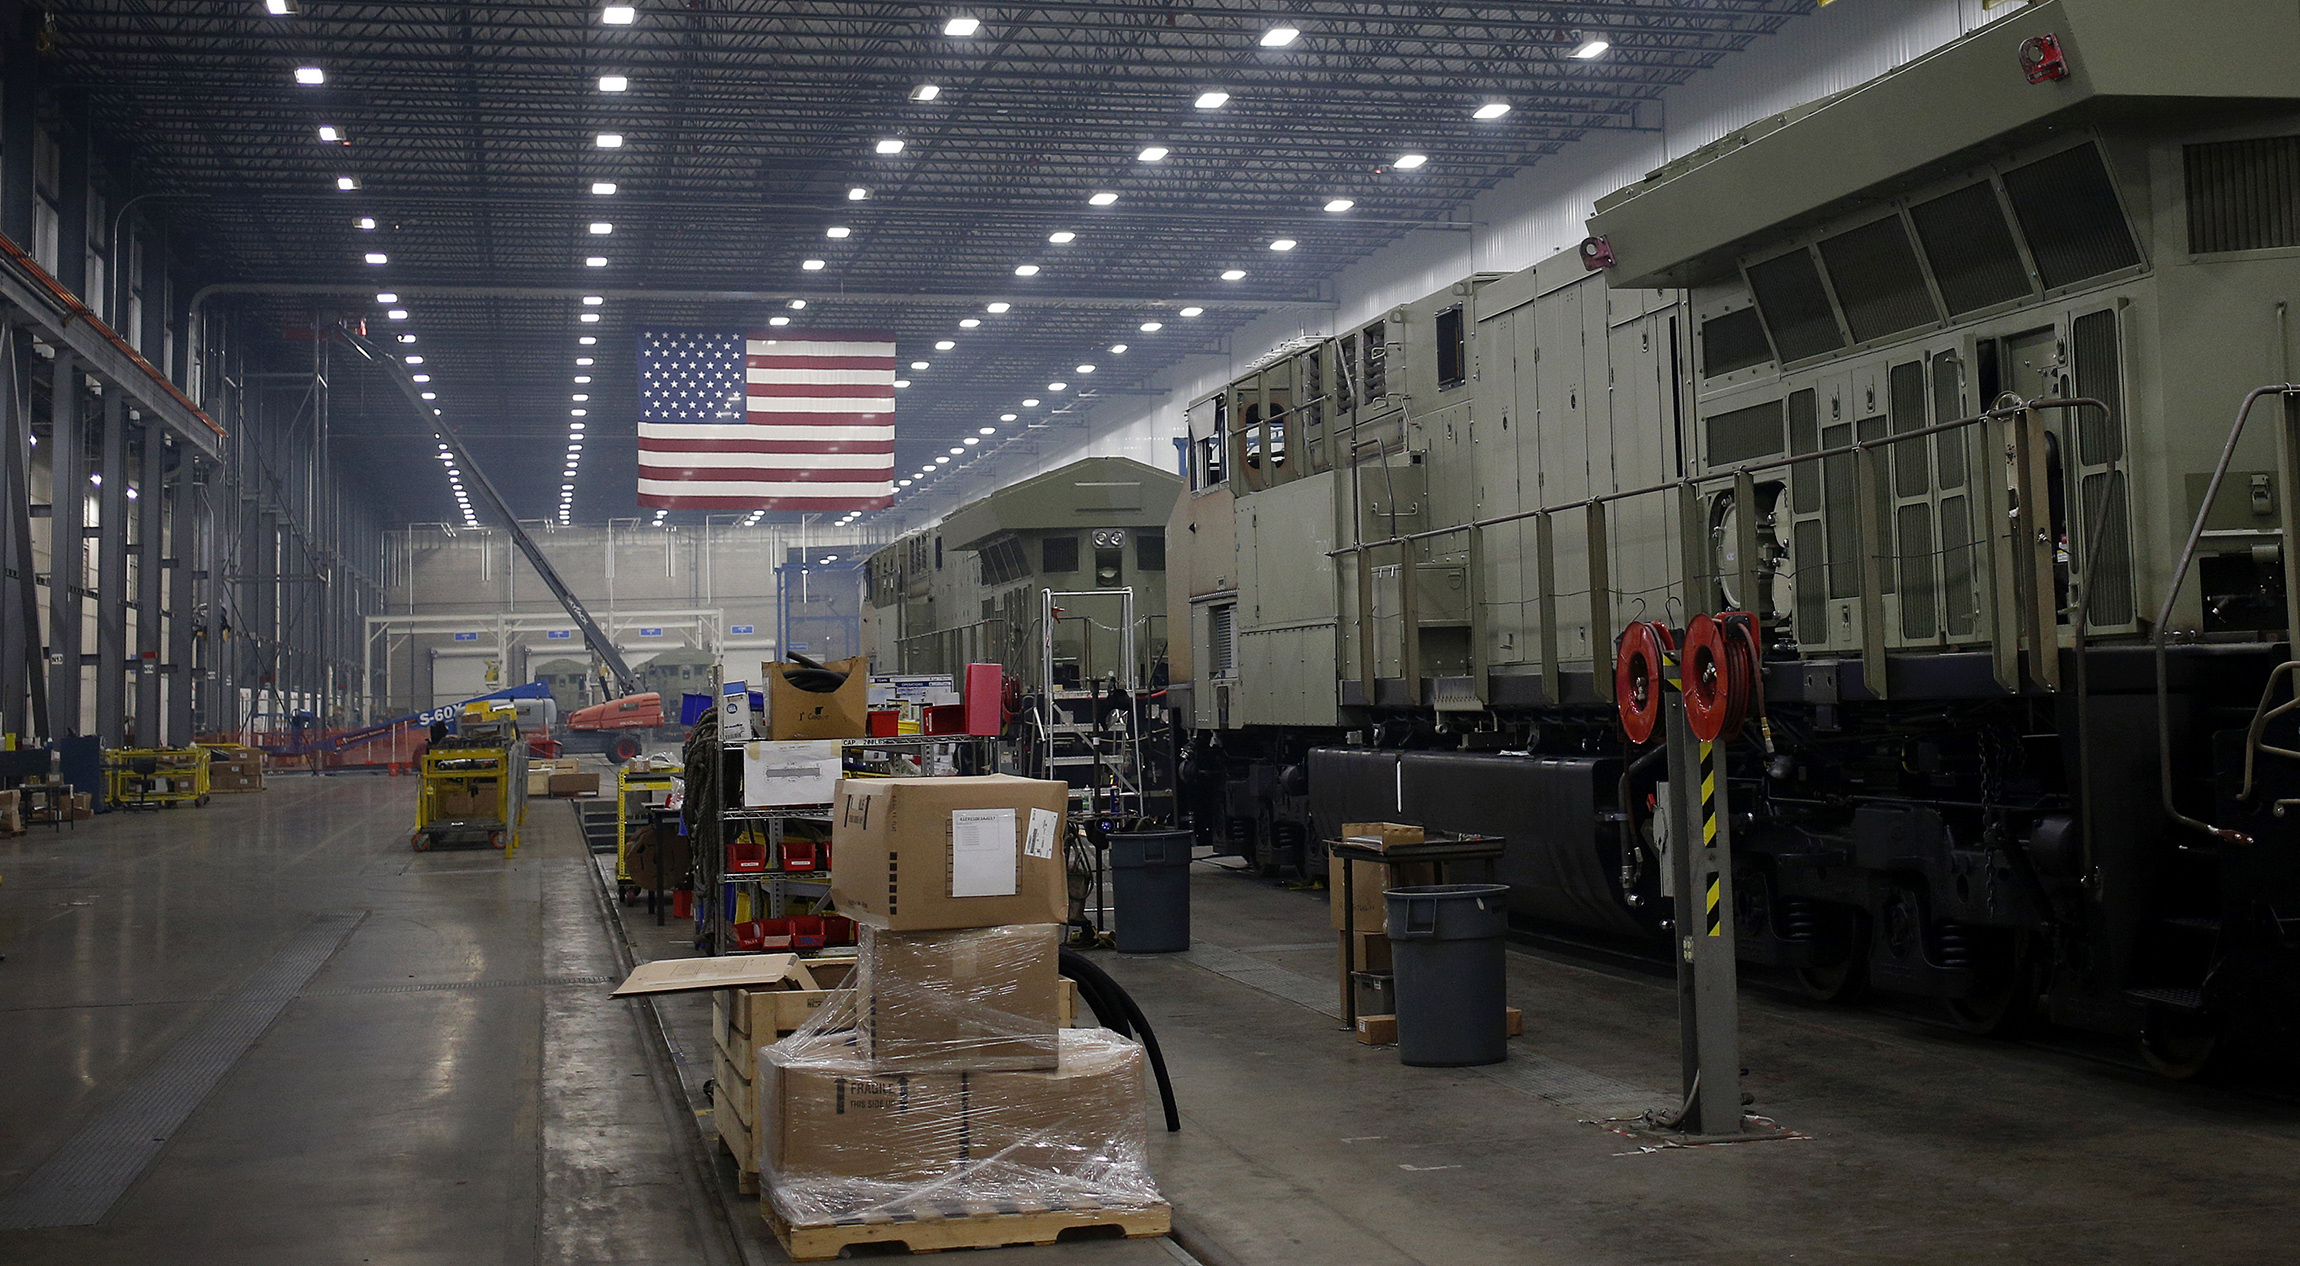 An American flag hangs above an assembly line in Fort Worth, Texas.